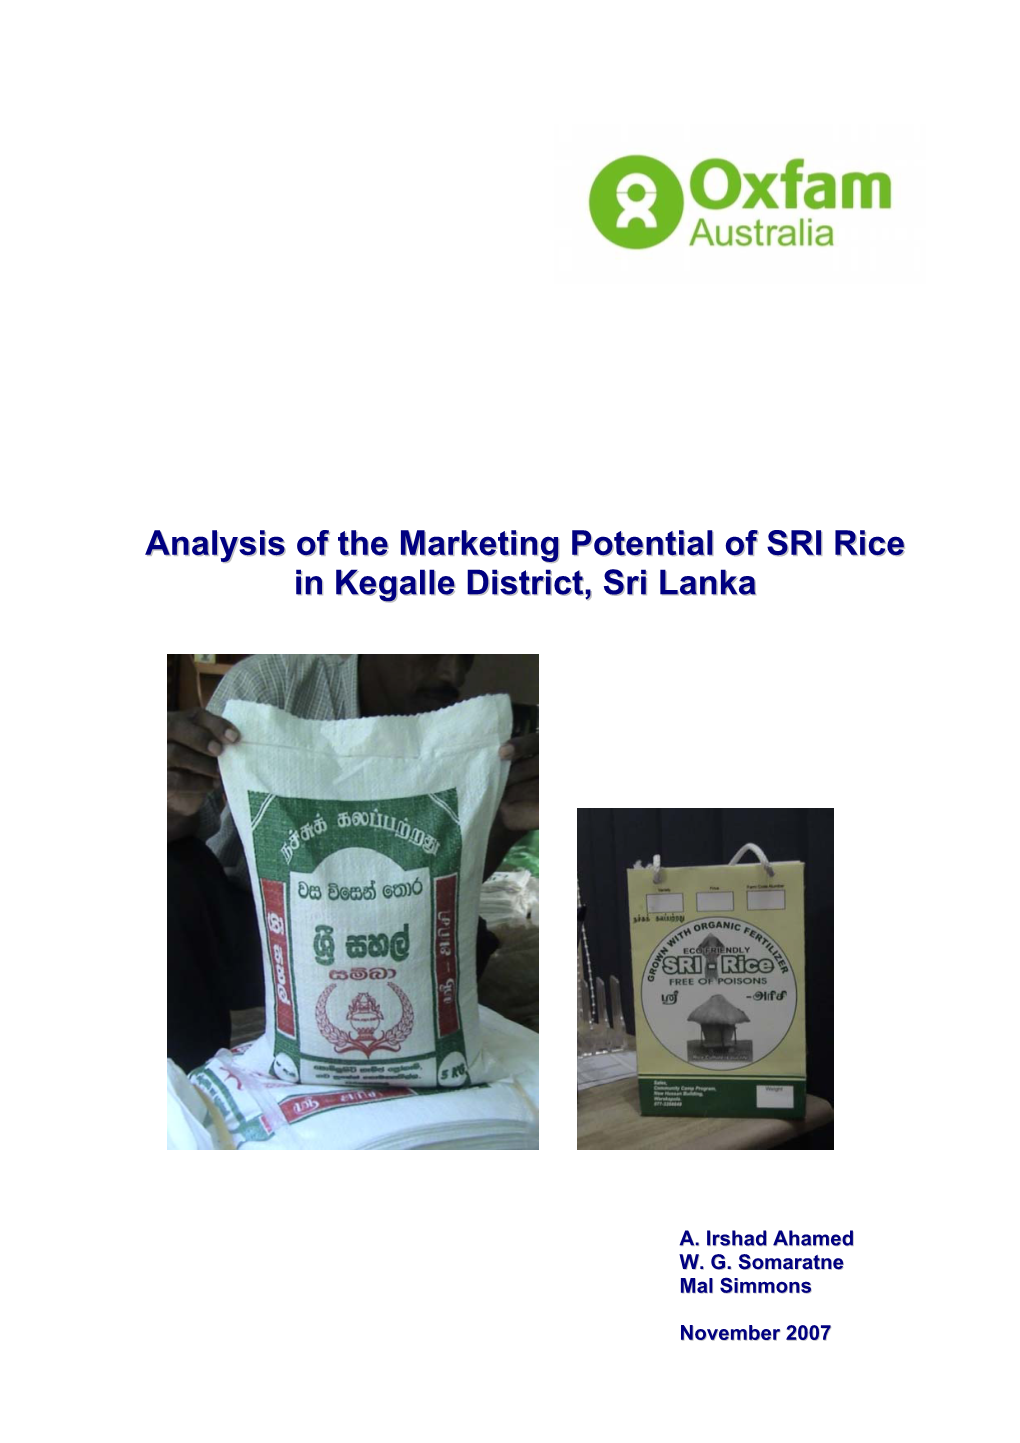 Analysis of the Marketing Potential of SRI Rice in Kegalle District, Sri Lanka